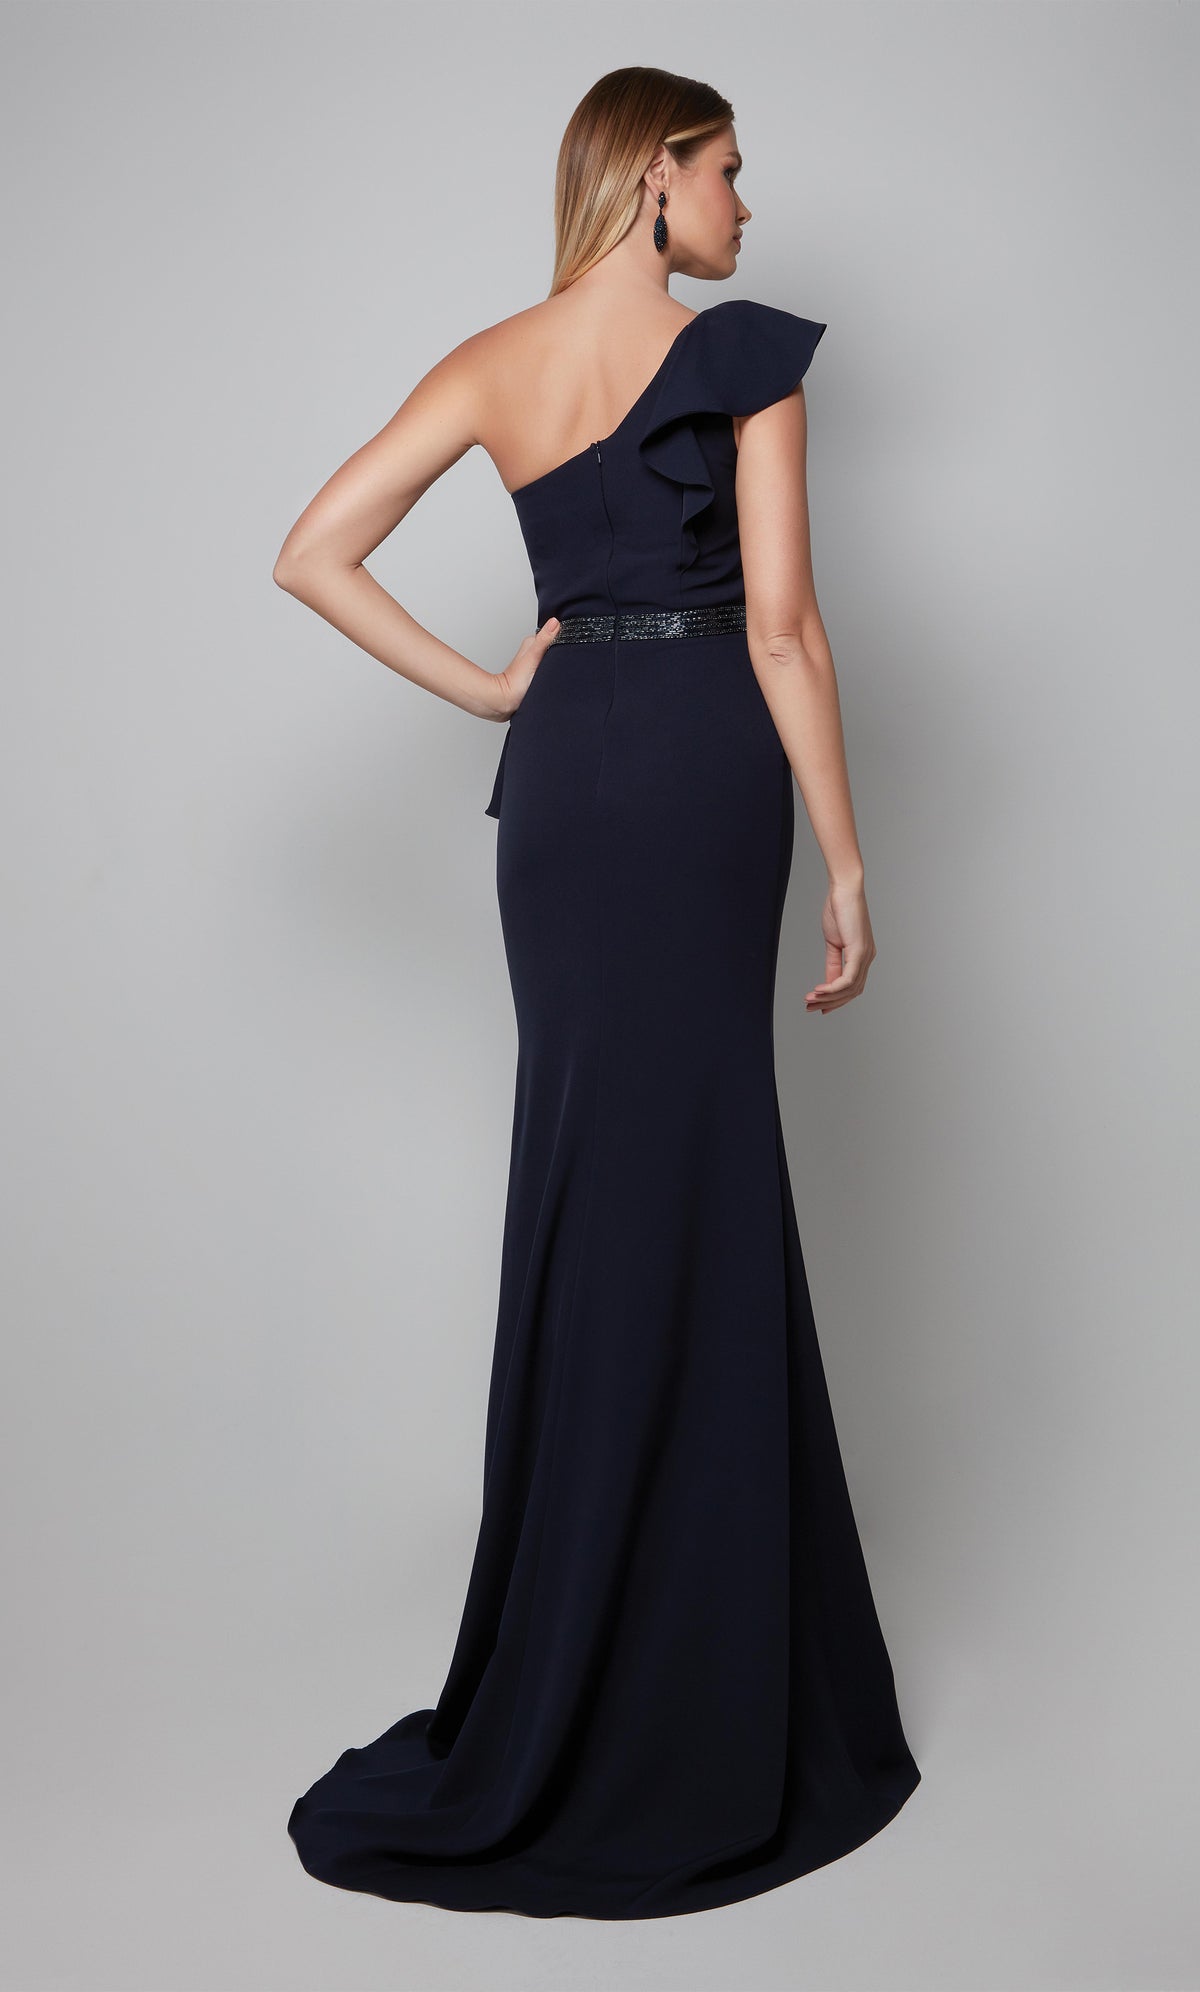 One shoulder ruffle dress with a zip up back, faux beaded belt, and train in midnight blue.